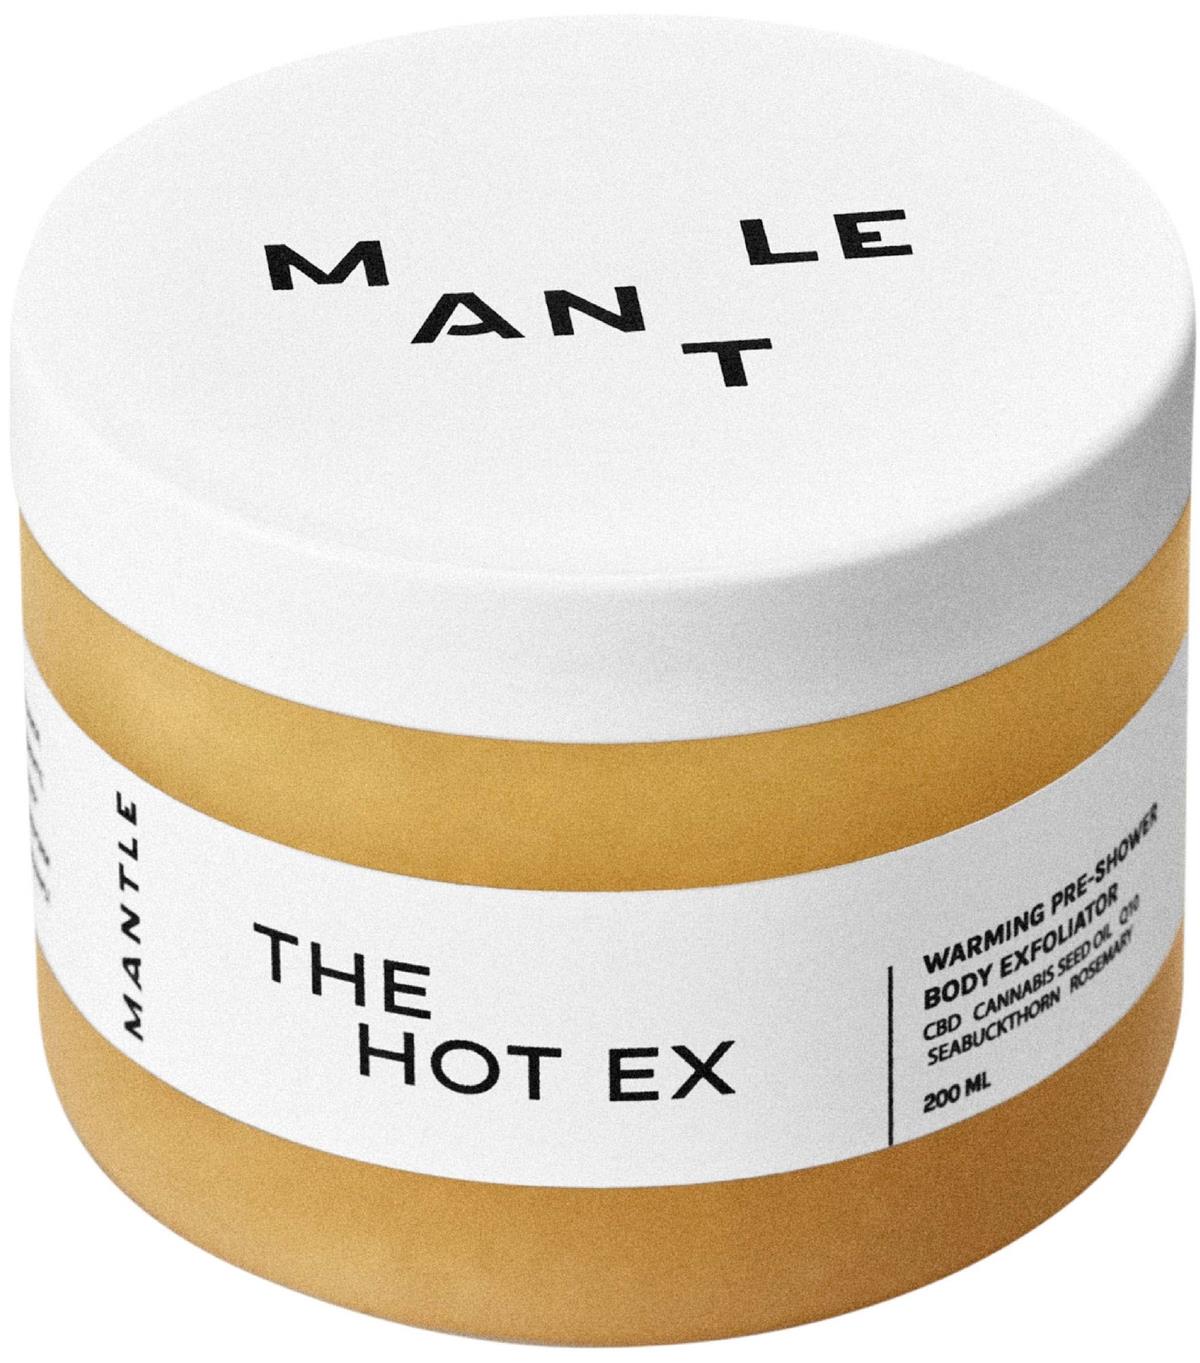 Mantle The Hot Ex 200 ml